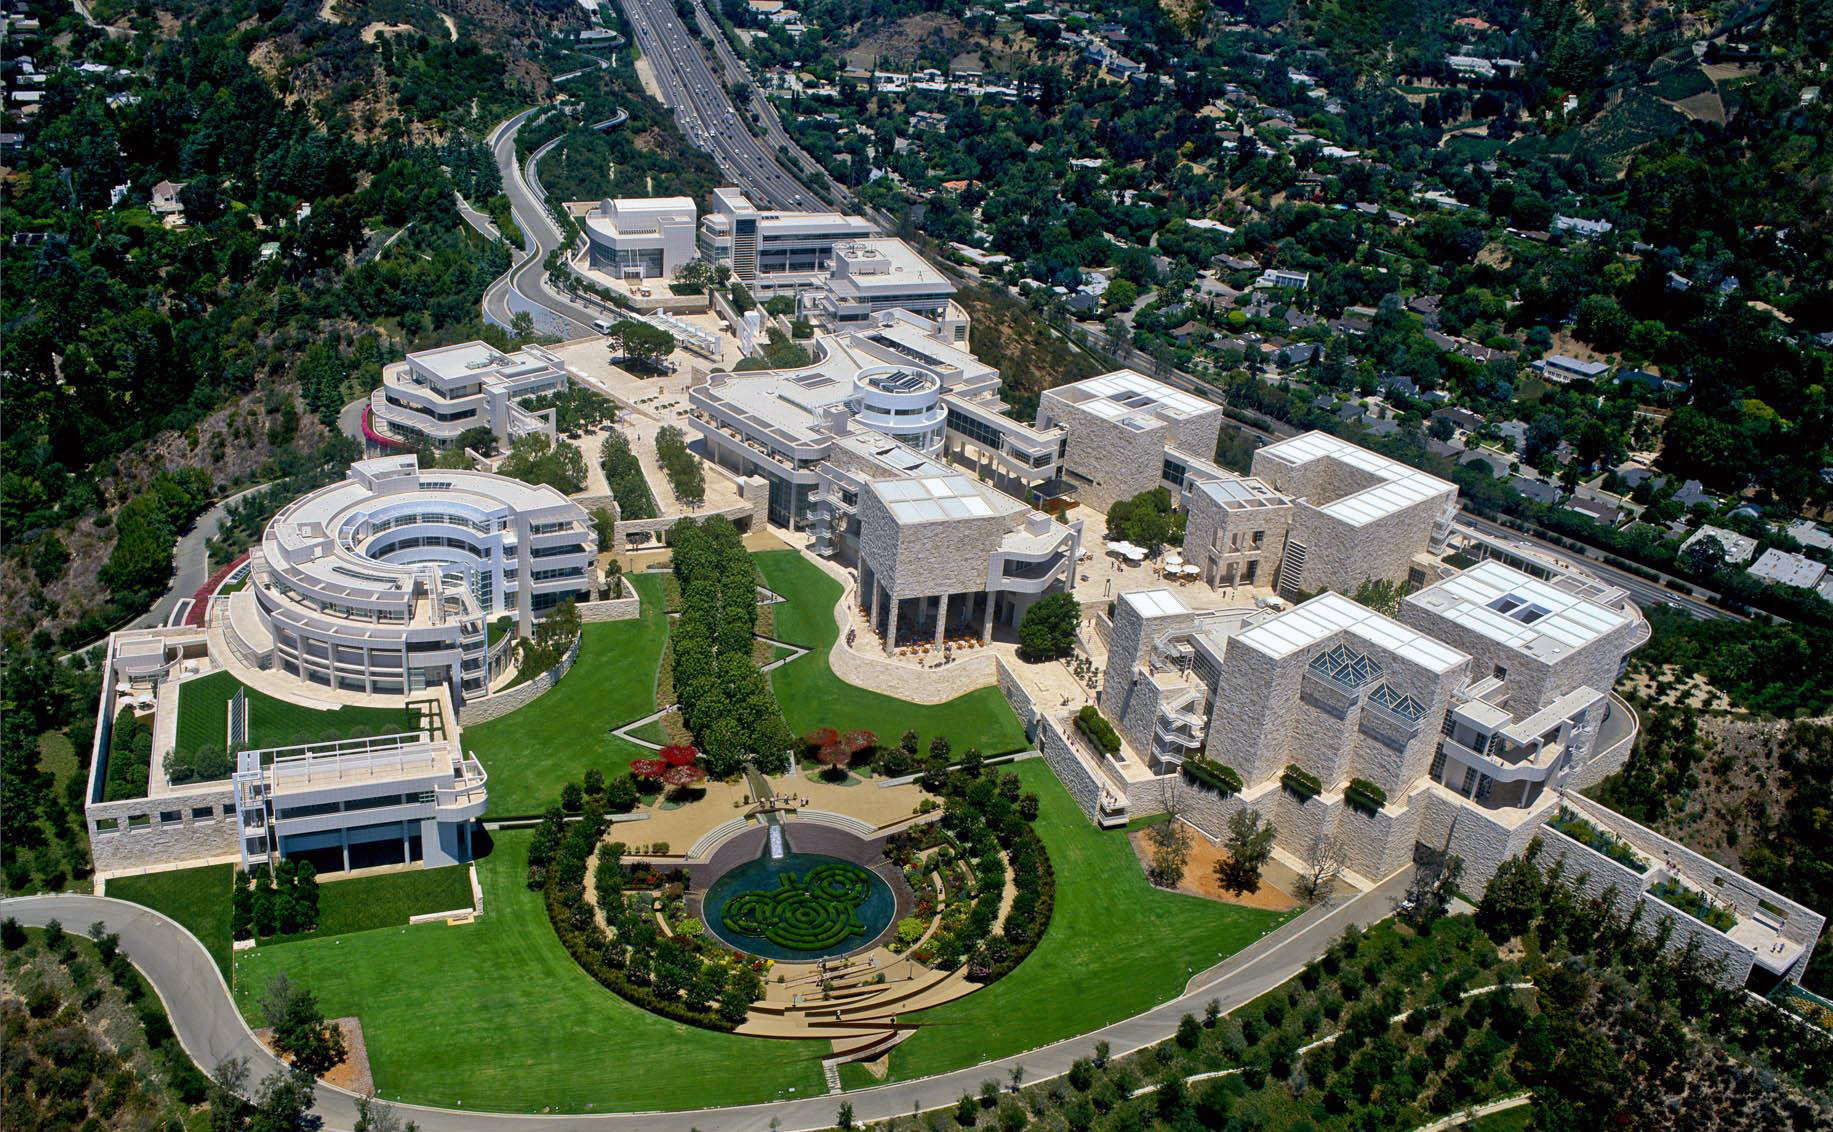 Getty Center - Artistic Masterpieces